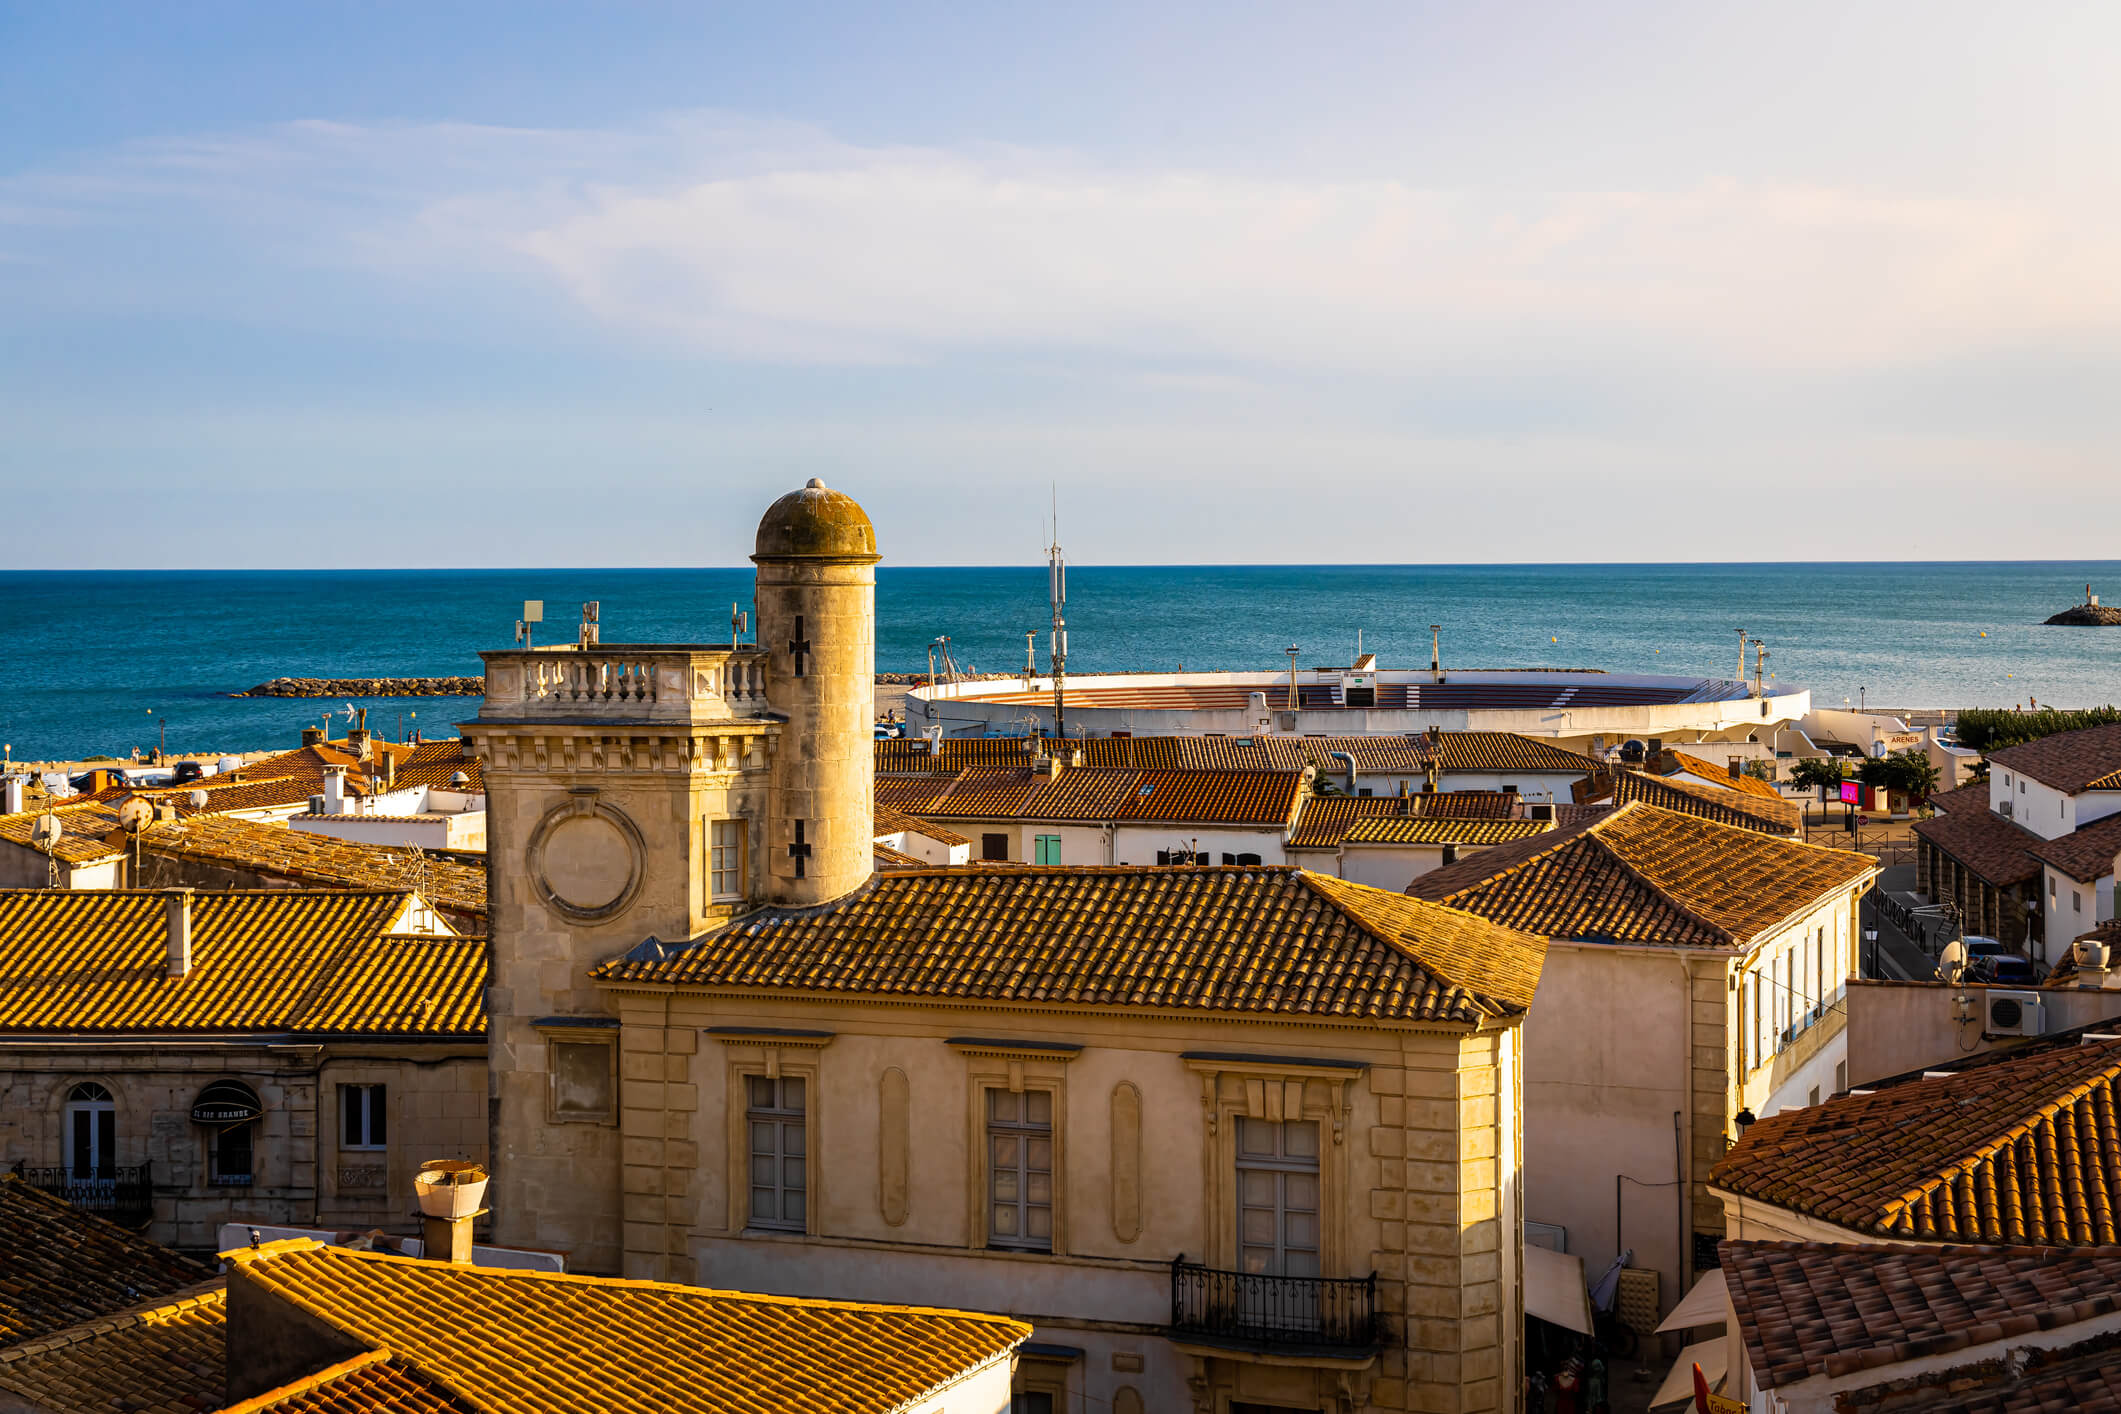 The sunset view of Saintes-Maries-de-la-Mer,  the capital of the Camargue in the south of France